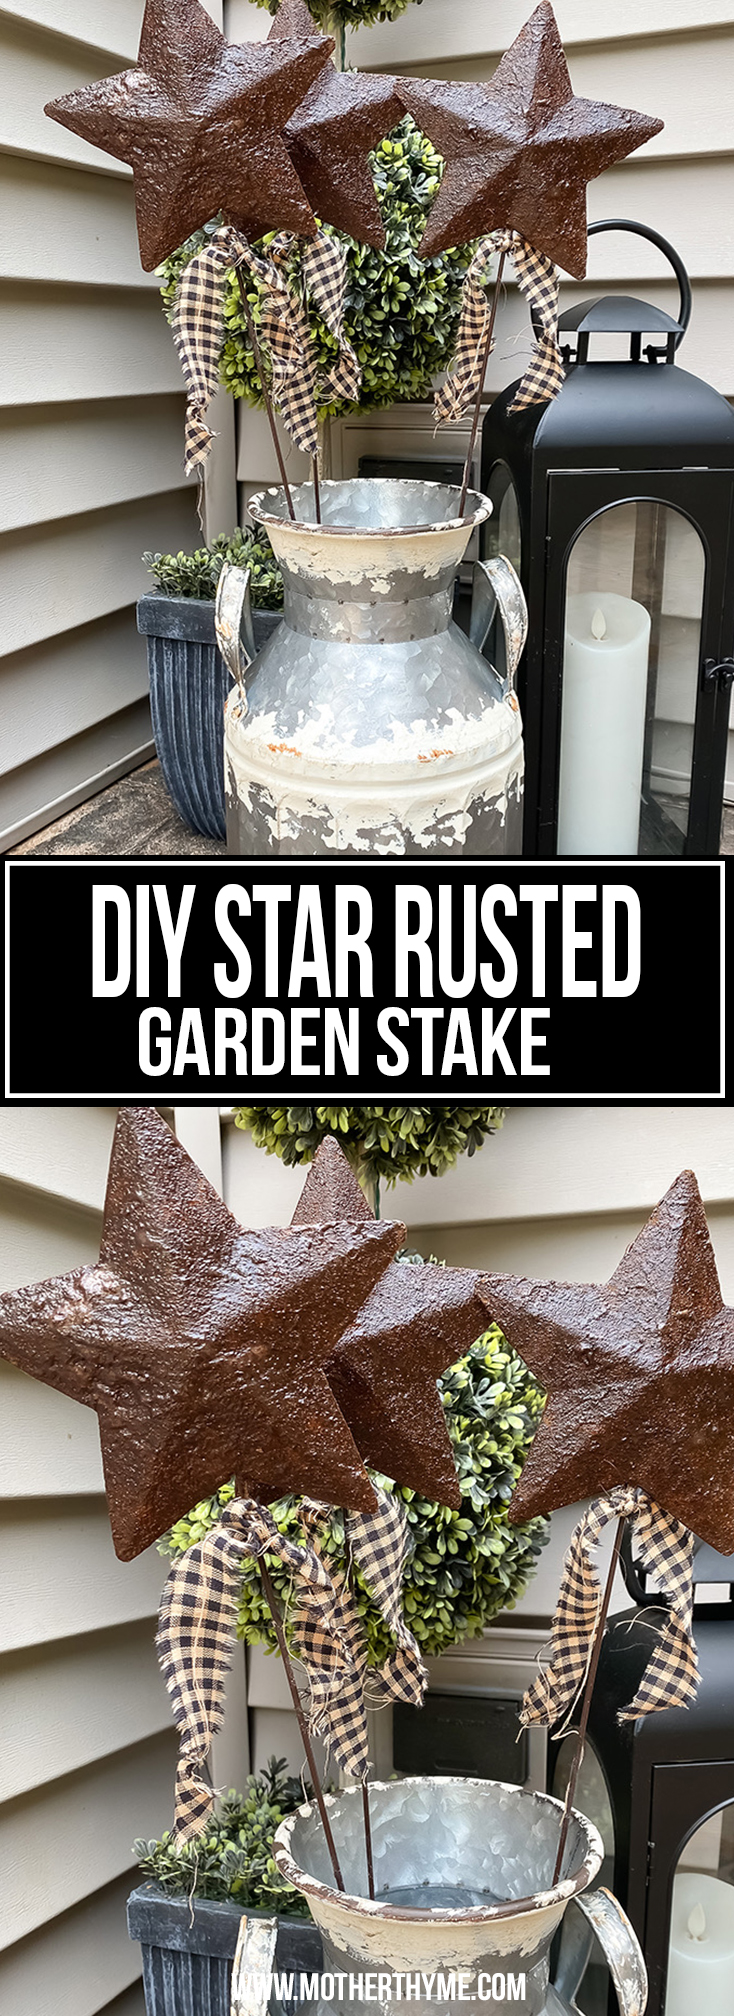 STAR RUSTED GARDEN STAKE 